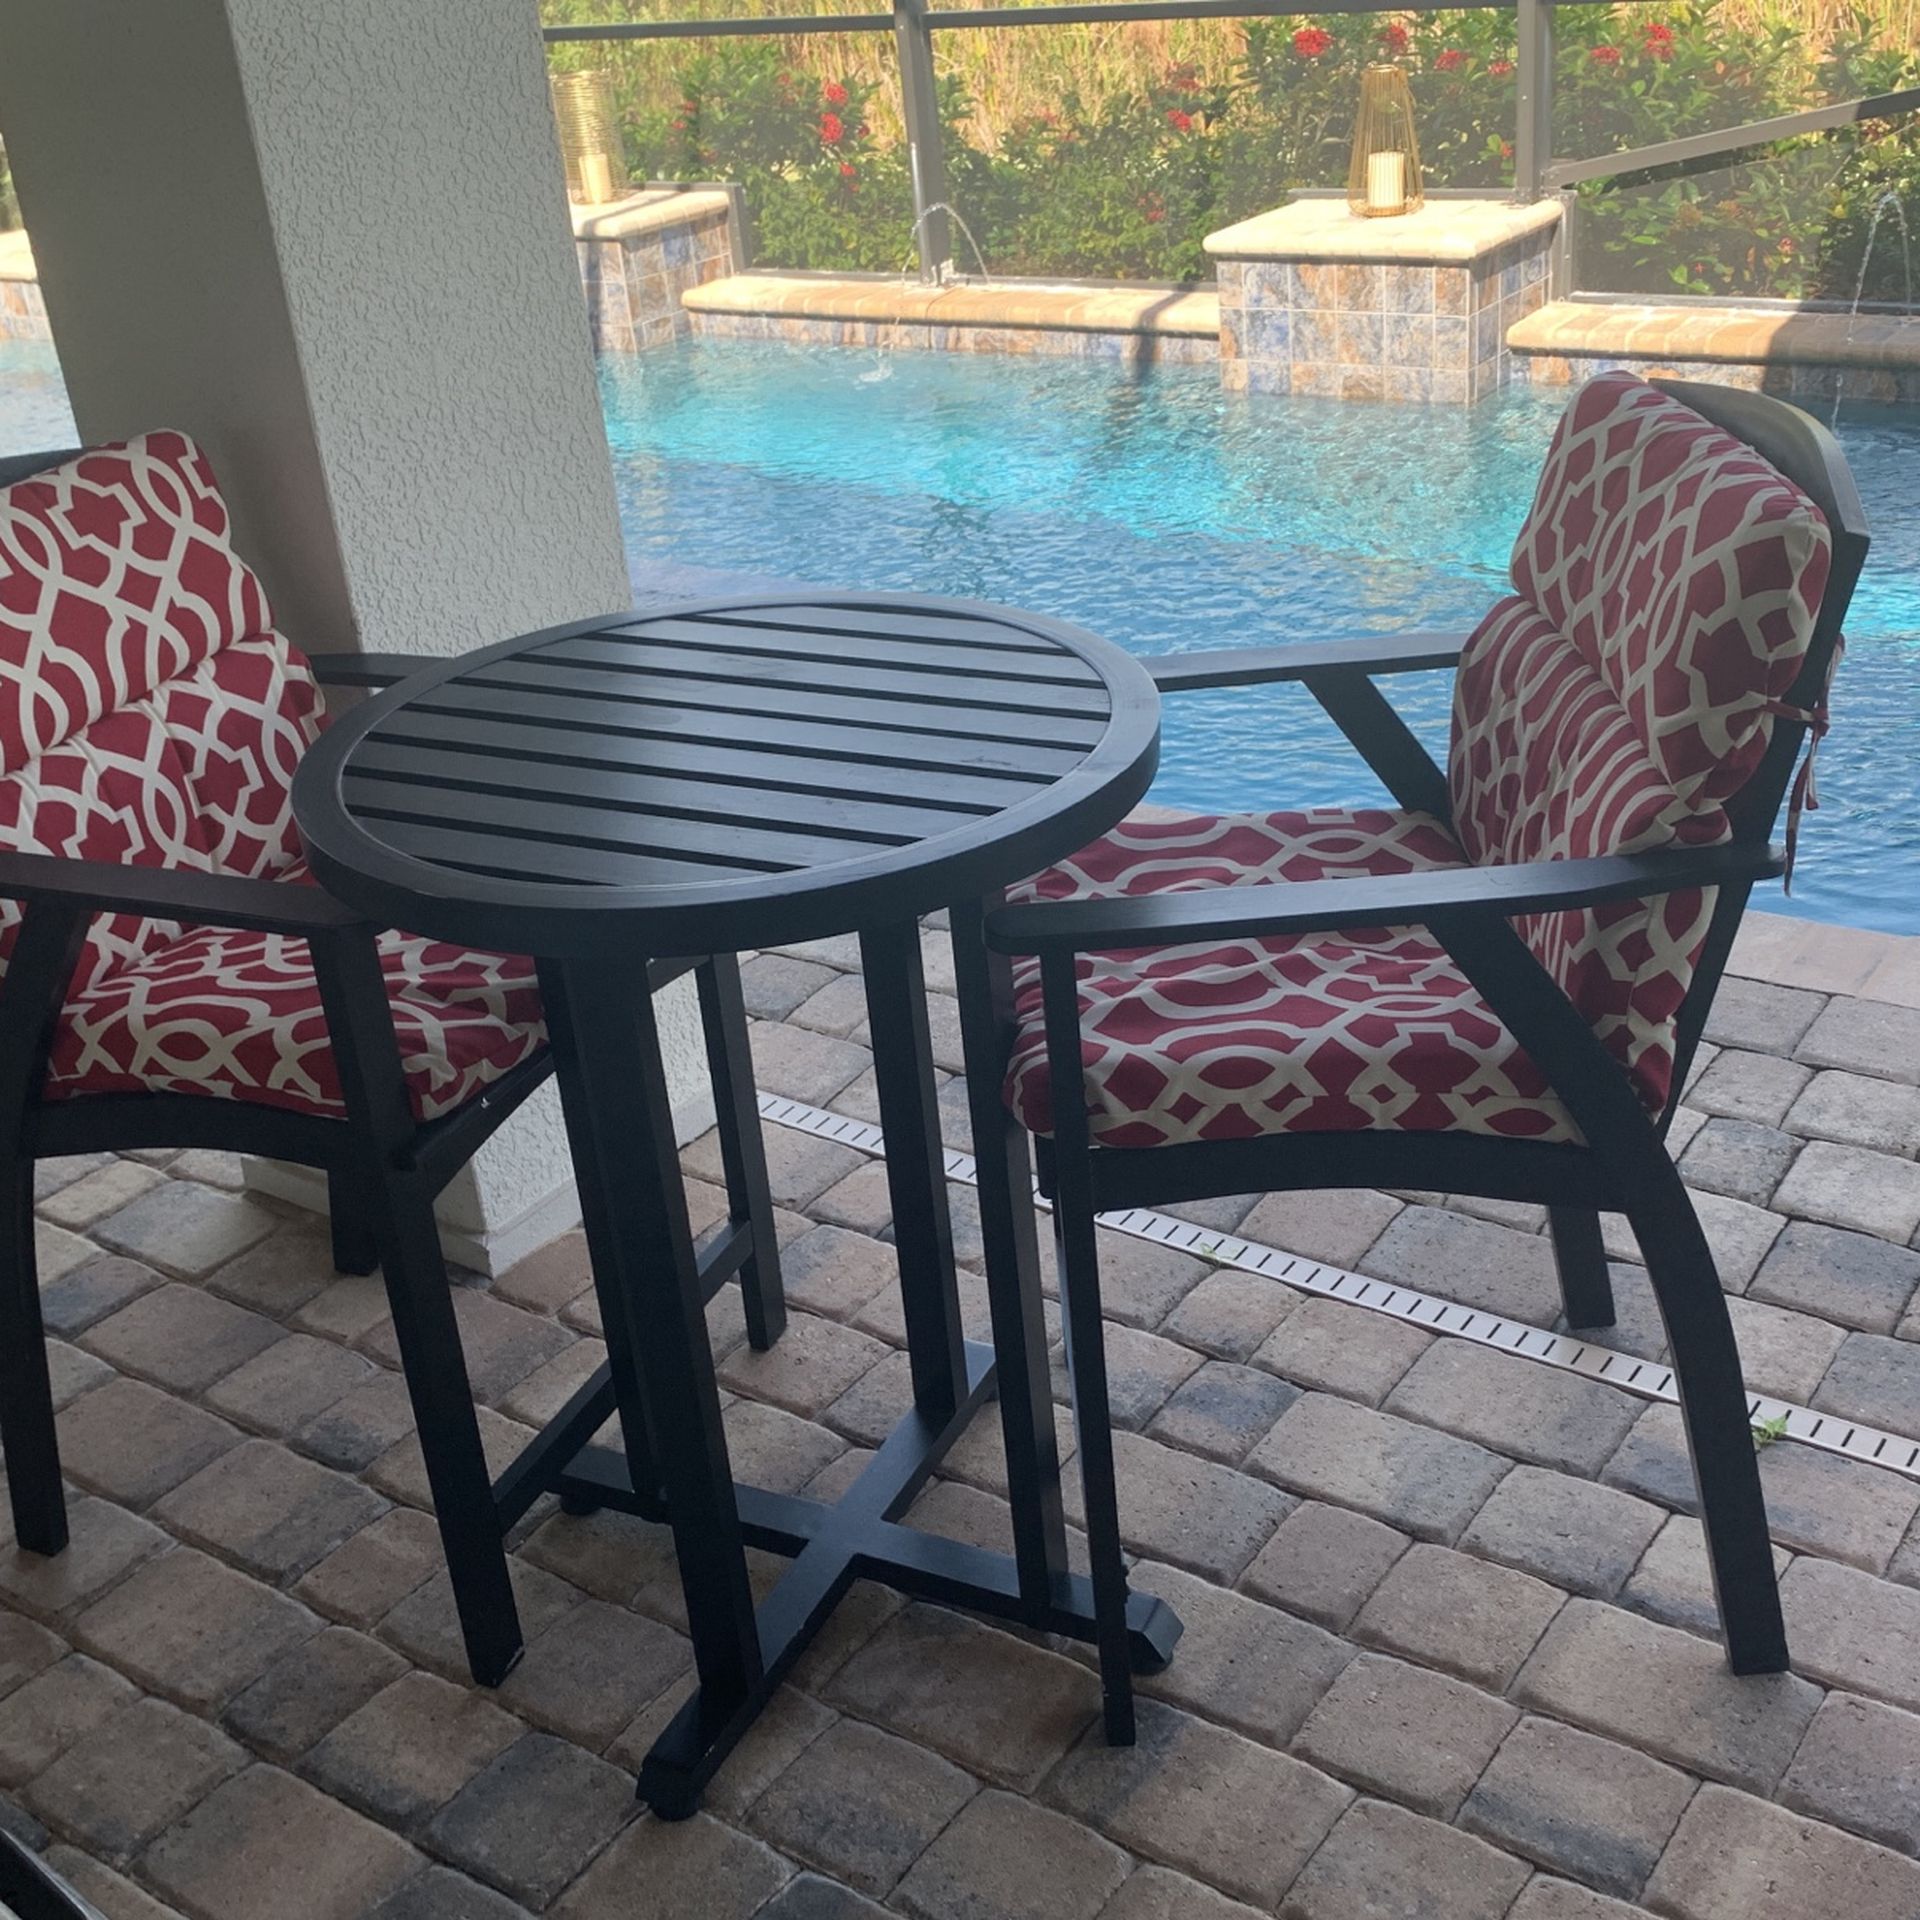 Table With Two Chairs Outdoor Set In Black With Red Cushions